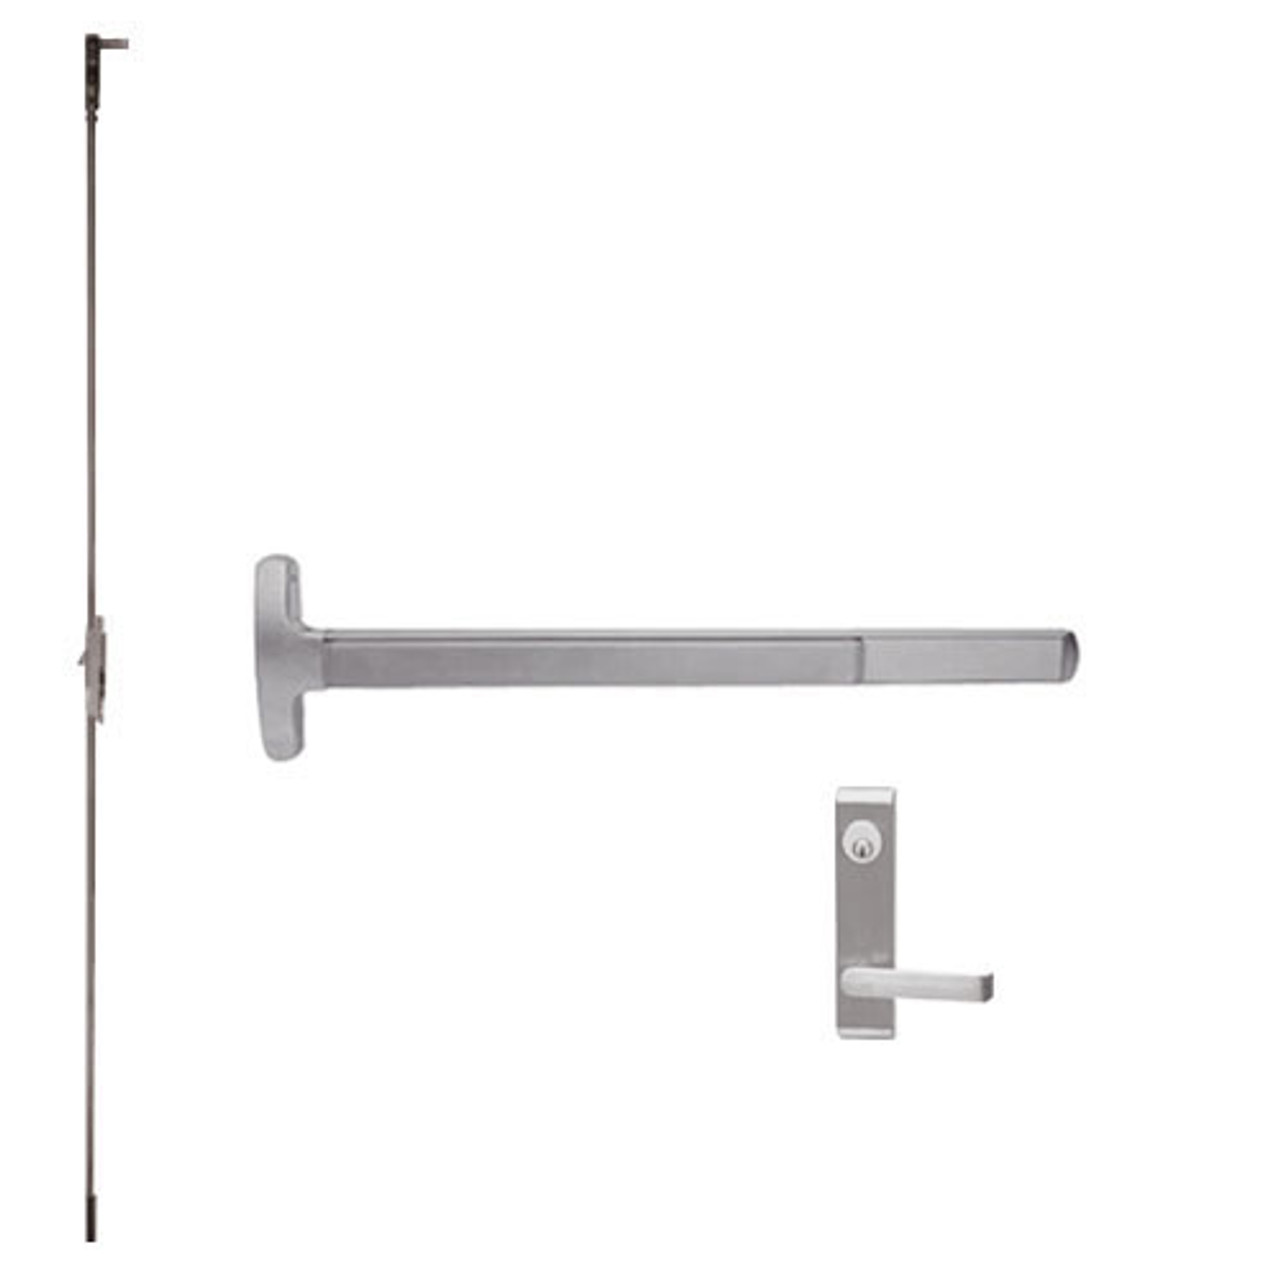 F-24-C-L-DANE-US32D-4-LHR Falcon Exit Device in Satin Stainless Steel